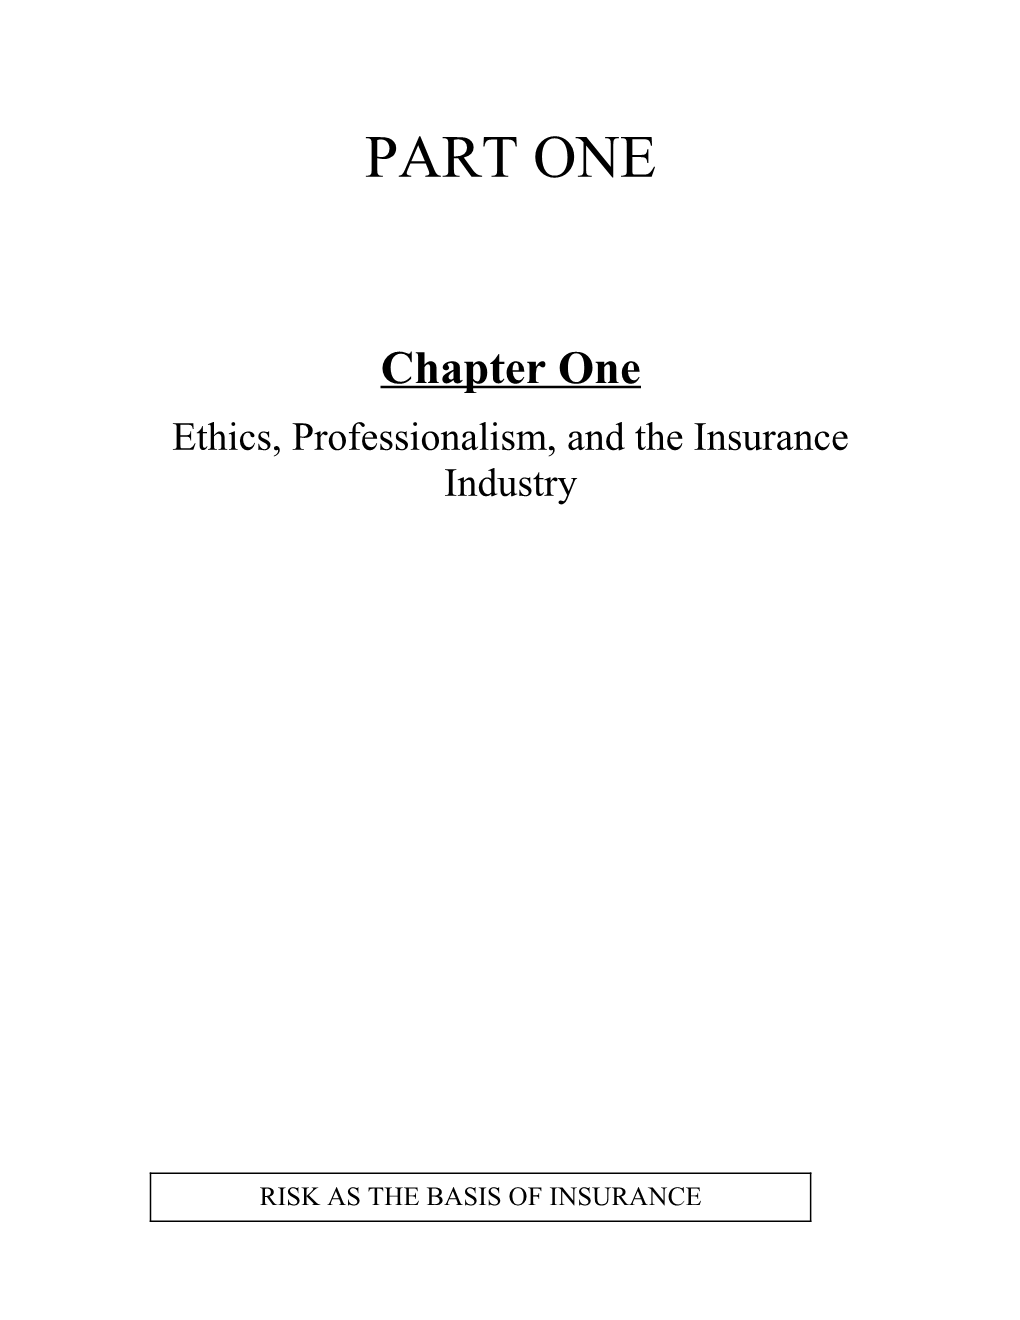 Ethics, Professionalism, and the Insurance Industry